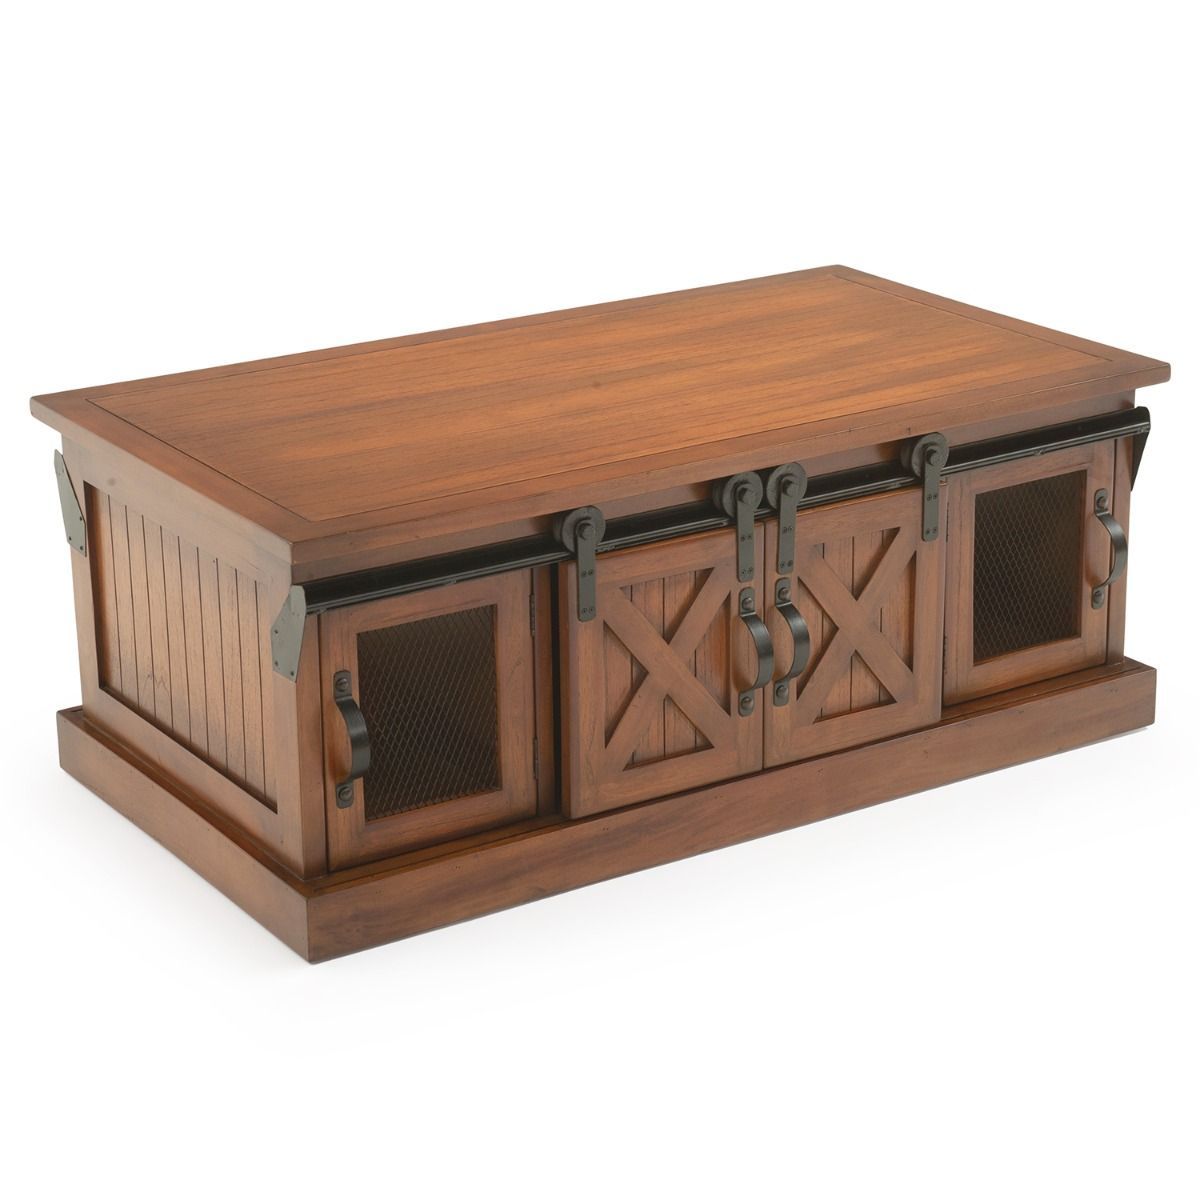 Rolling Hills Barn Door Coffee Table Pertaining To Coffee Tables With Storage And Barn Doors (View 9 of 15)